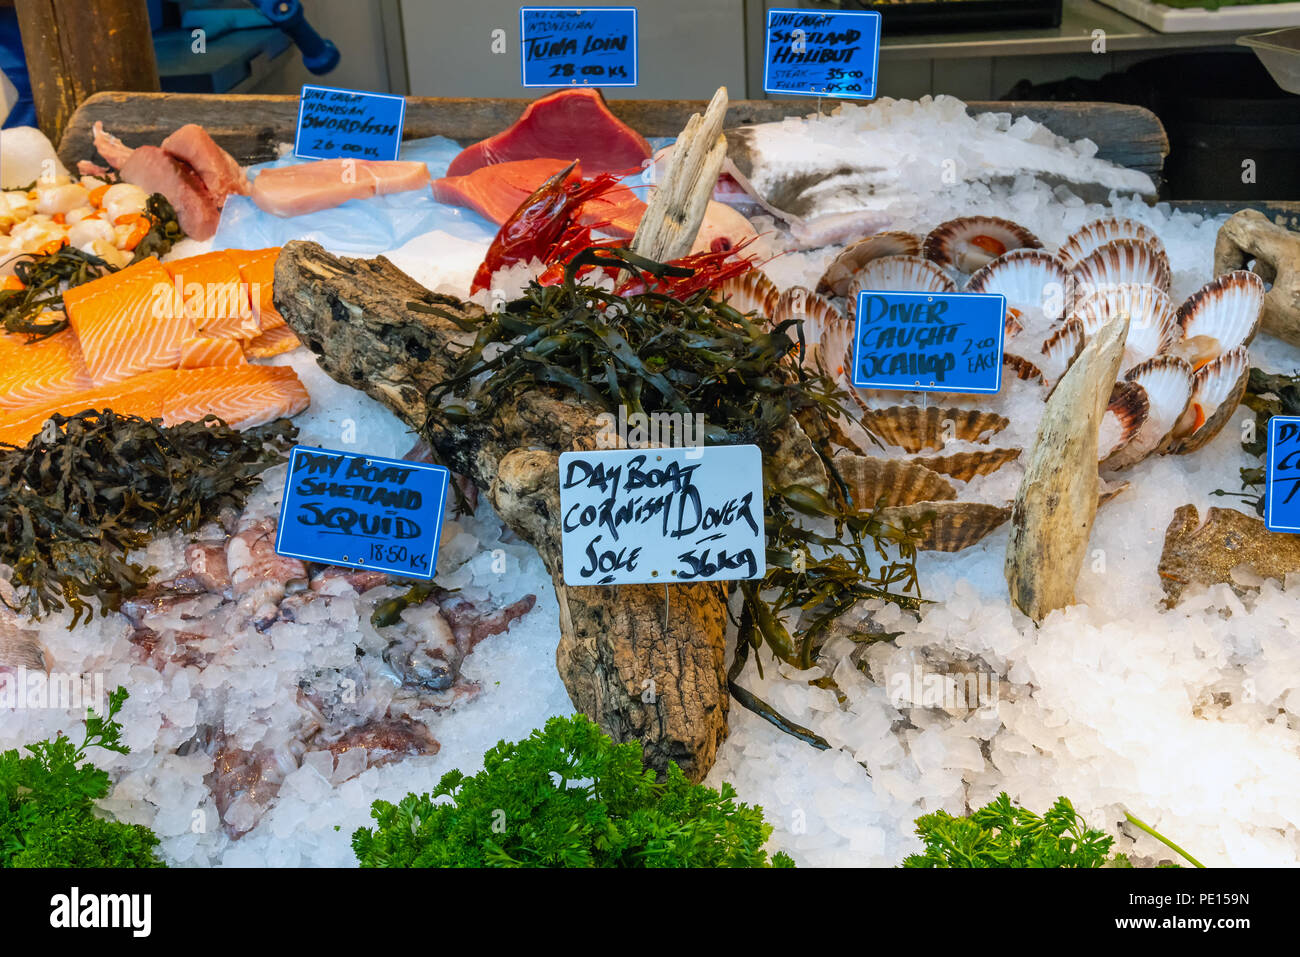 Fish, seafood and scallops for sale at a market in London, UK Stock Photo